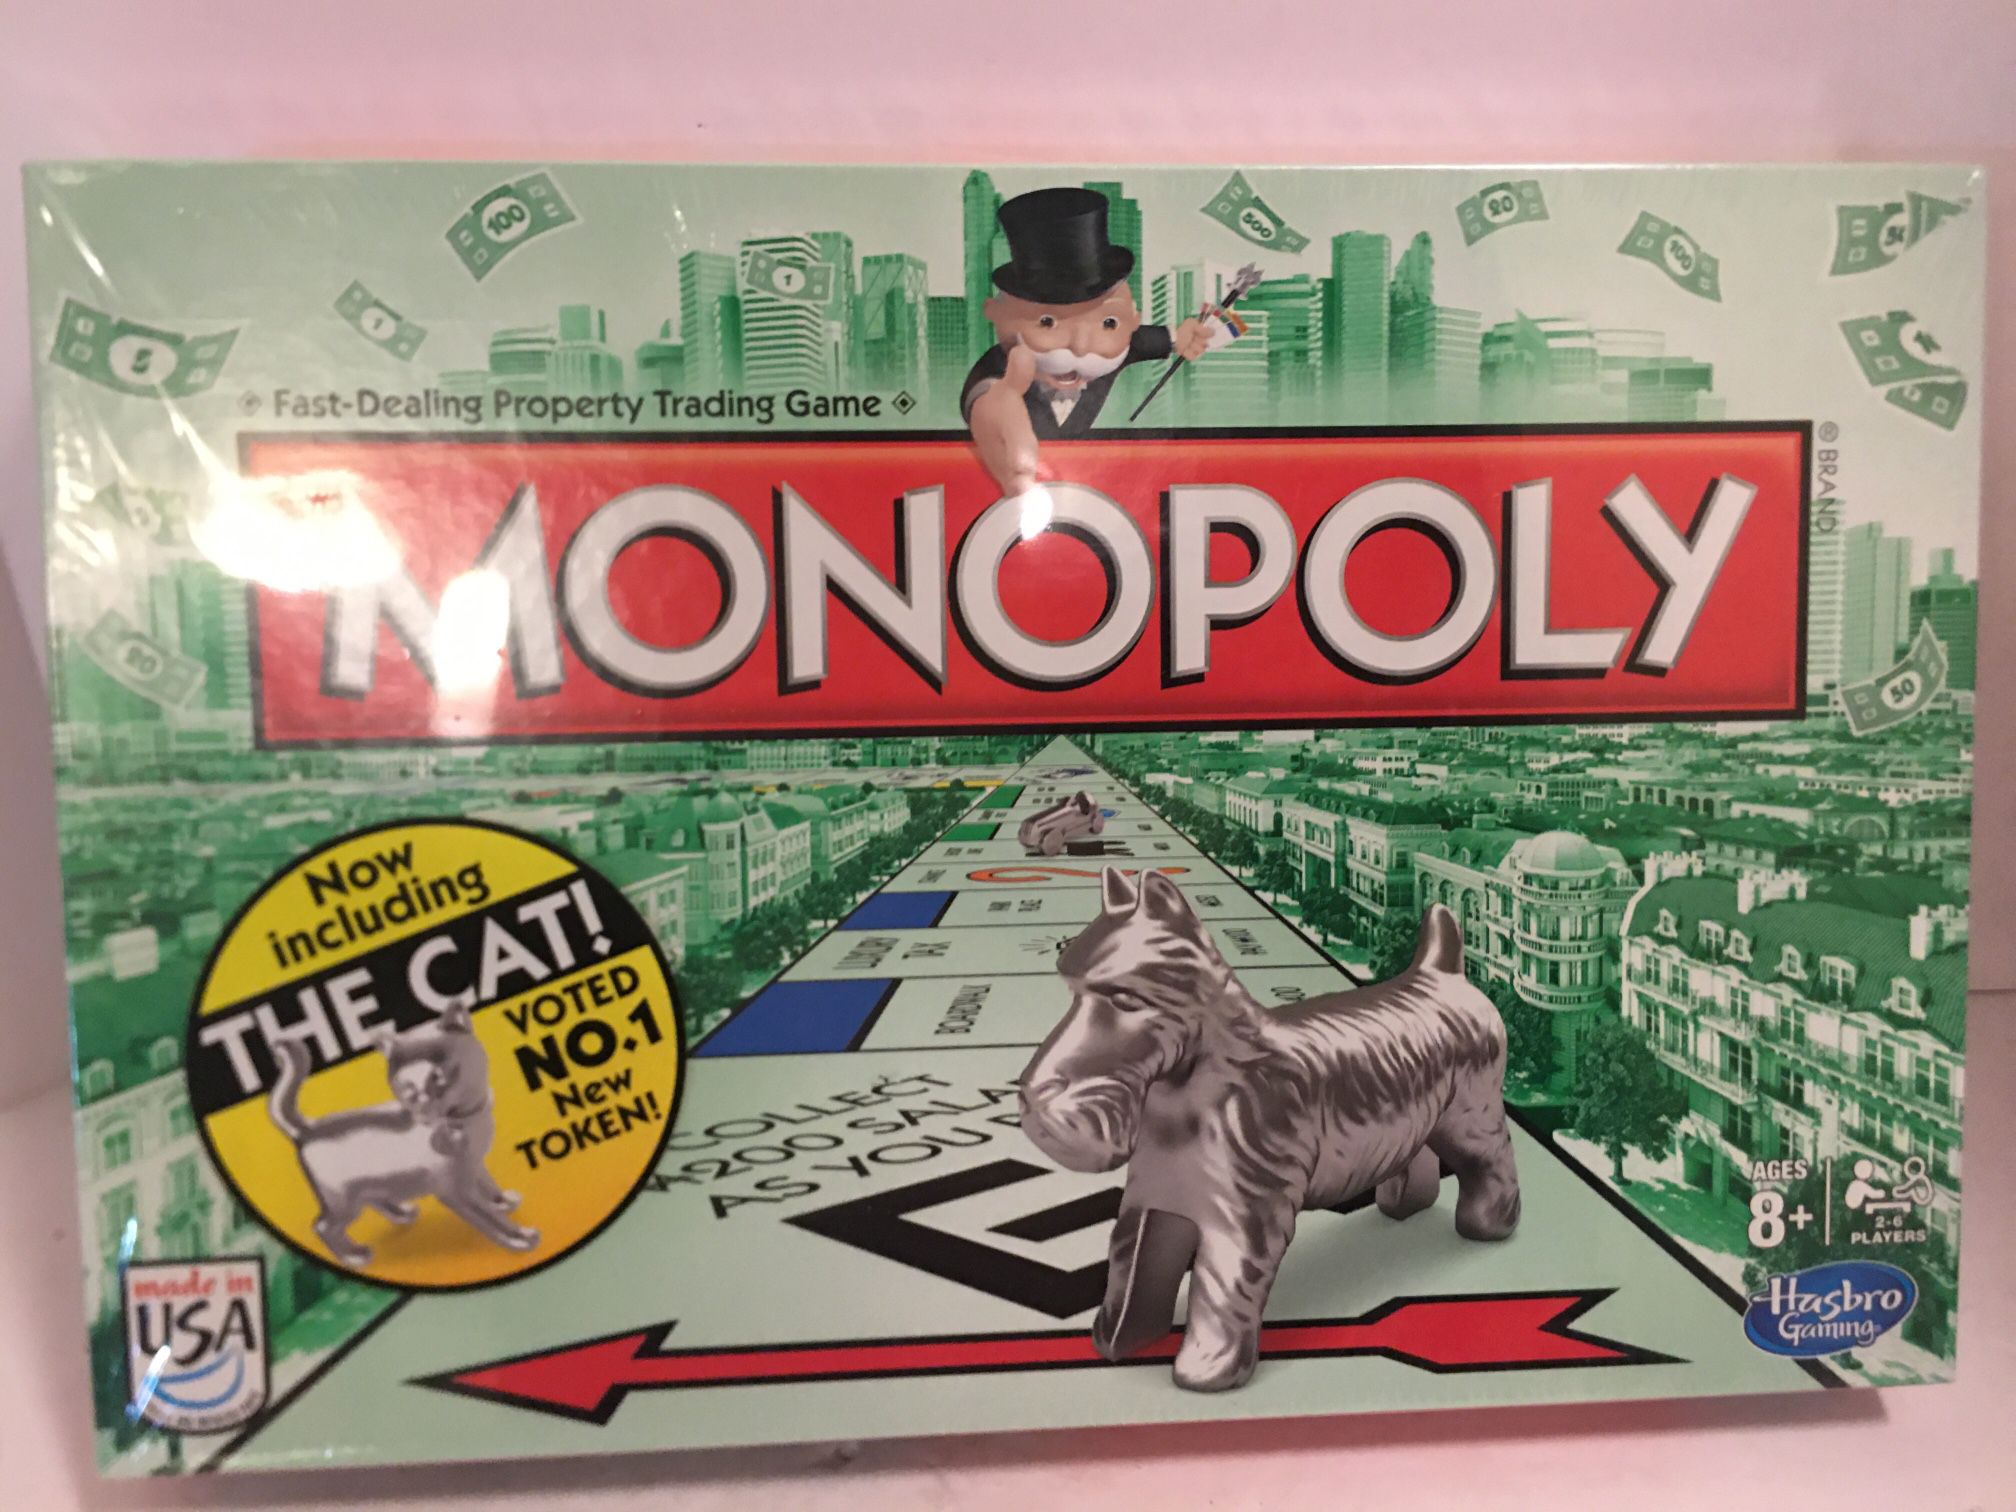 2013 Monopoly Board Game The Cat Token Classic Edition, Brand new SEALED! “Including the Cat” Voted #1 new token. 